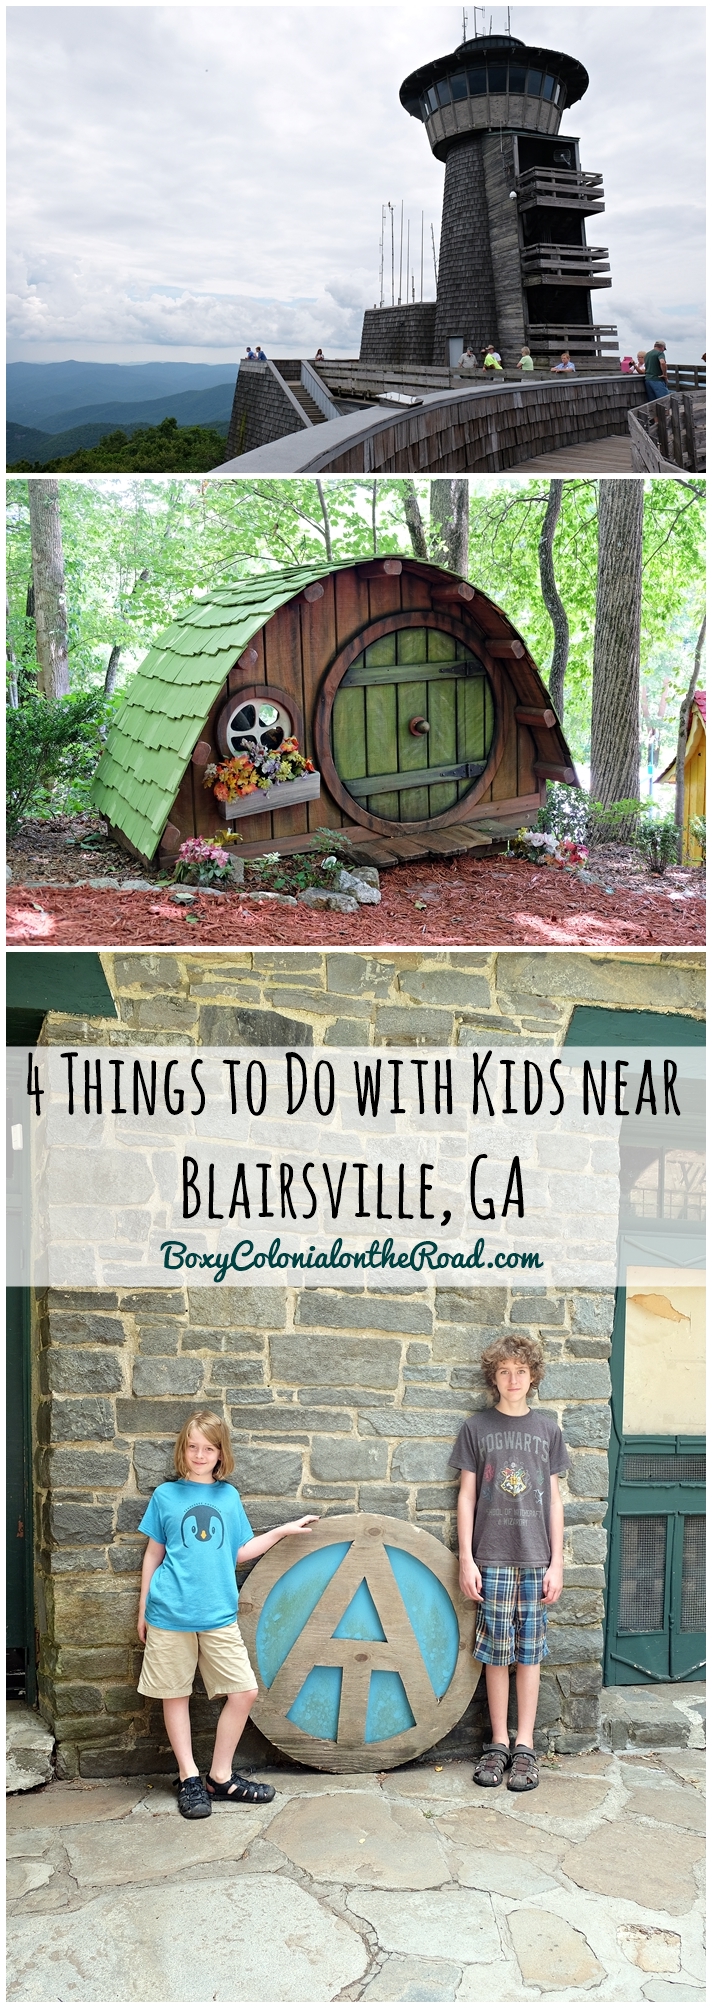 Exlporing the area around Blairsville, GA and Vogel State Park with kids: Brasstown Bald, Sleepy Hollow Enterprises, Helton Creek Falls, and Mountain Crossings at Walasi-Yi